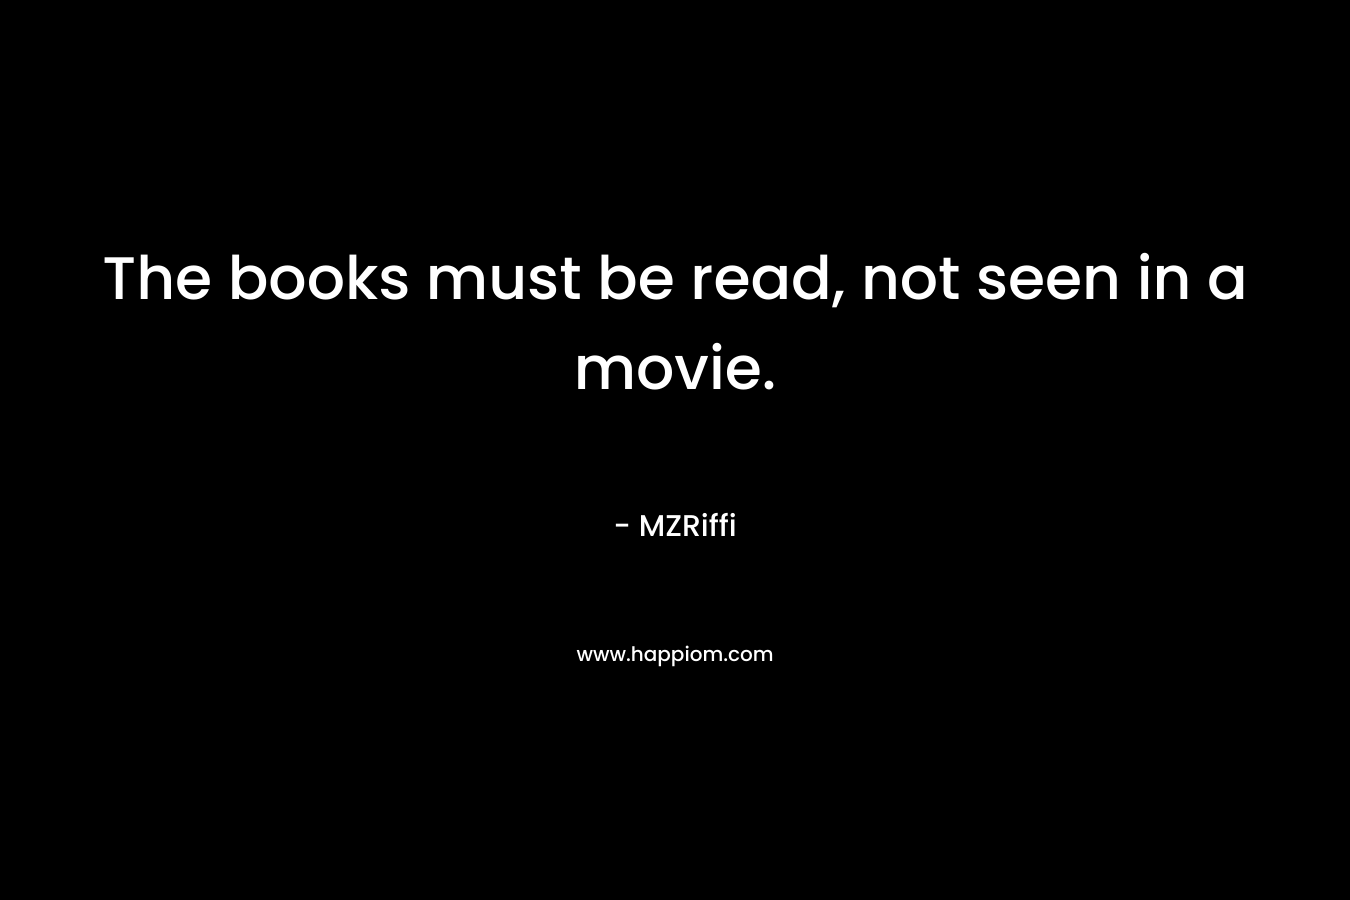 The books must be read, not seen in a movie.